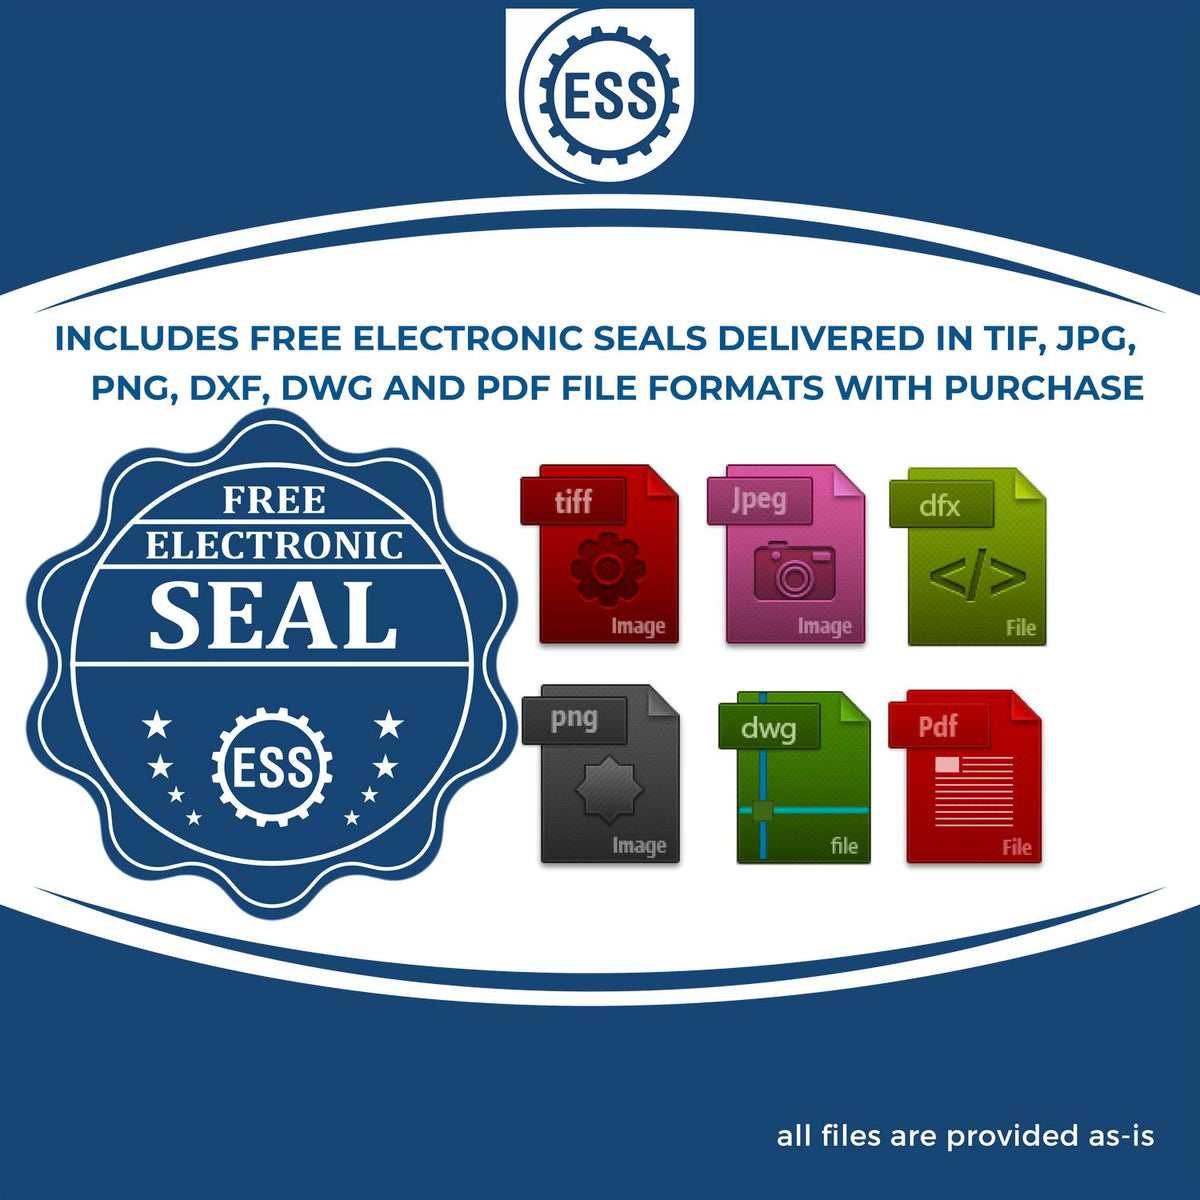 An infographic for the free electronic seal for the Hybrid North Carolina Land Surveyor Seal illustrating the different file type icons such as DXF, DWG, TIF, JPG and PNG.